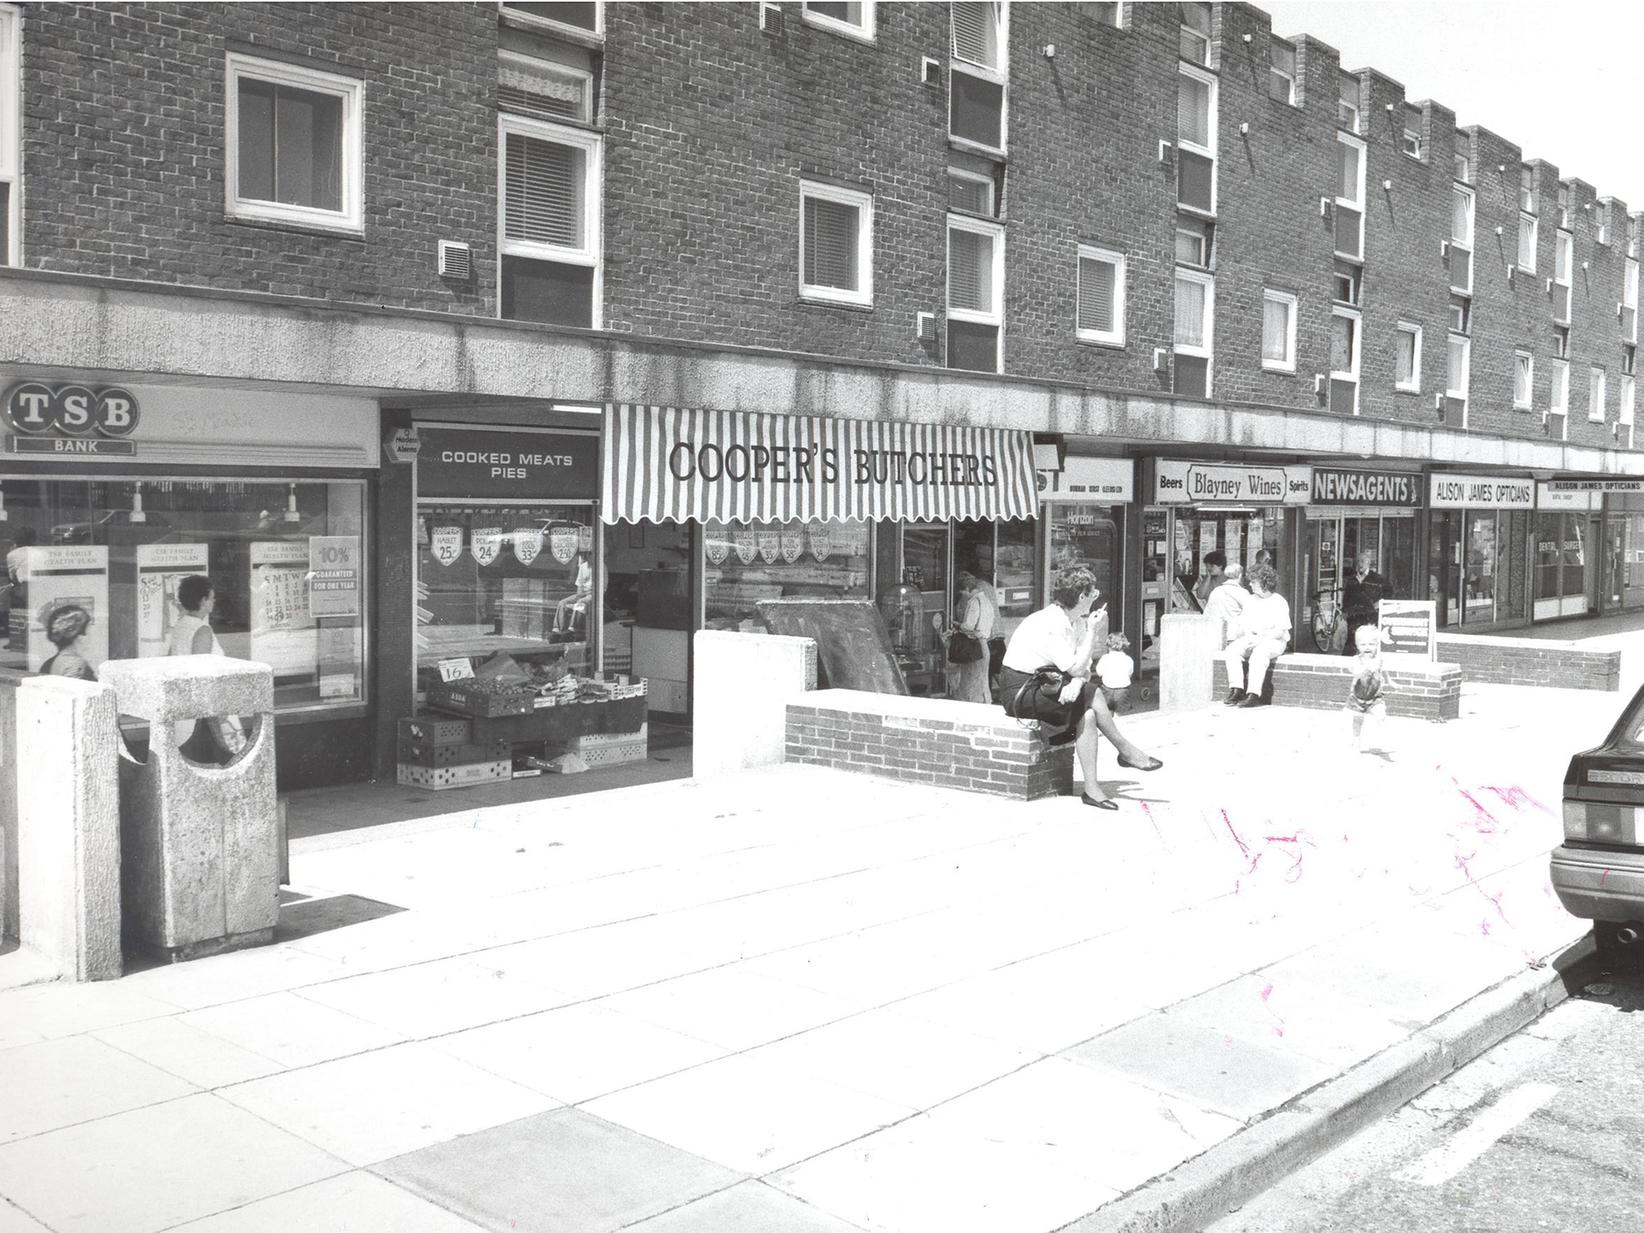 Do you remember these shops in Seacroft?